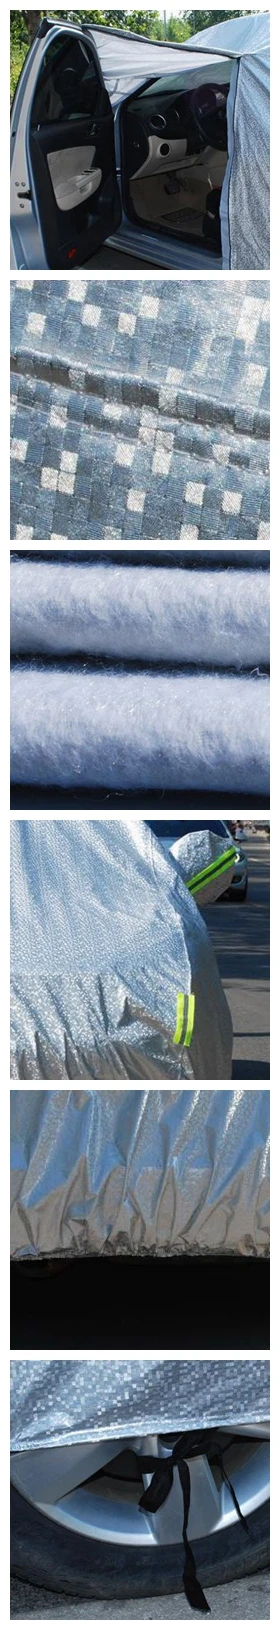 Universal cotton car covers Winter for outdoor dustproof rainproof snowproof and UV Full car cover For suv sedan hatchback